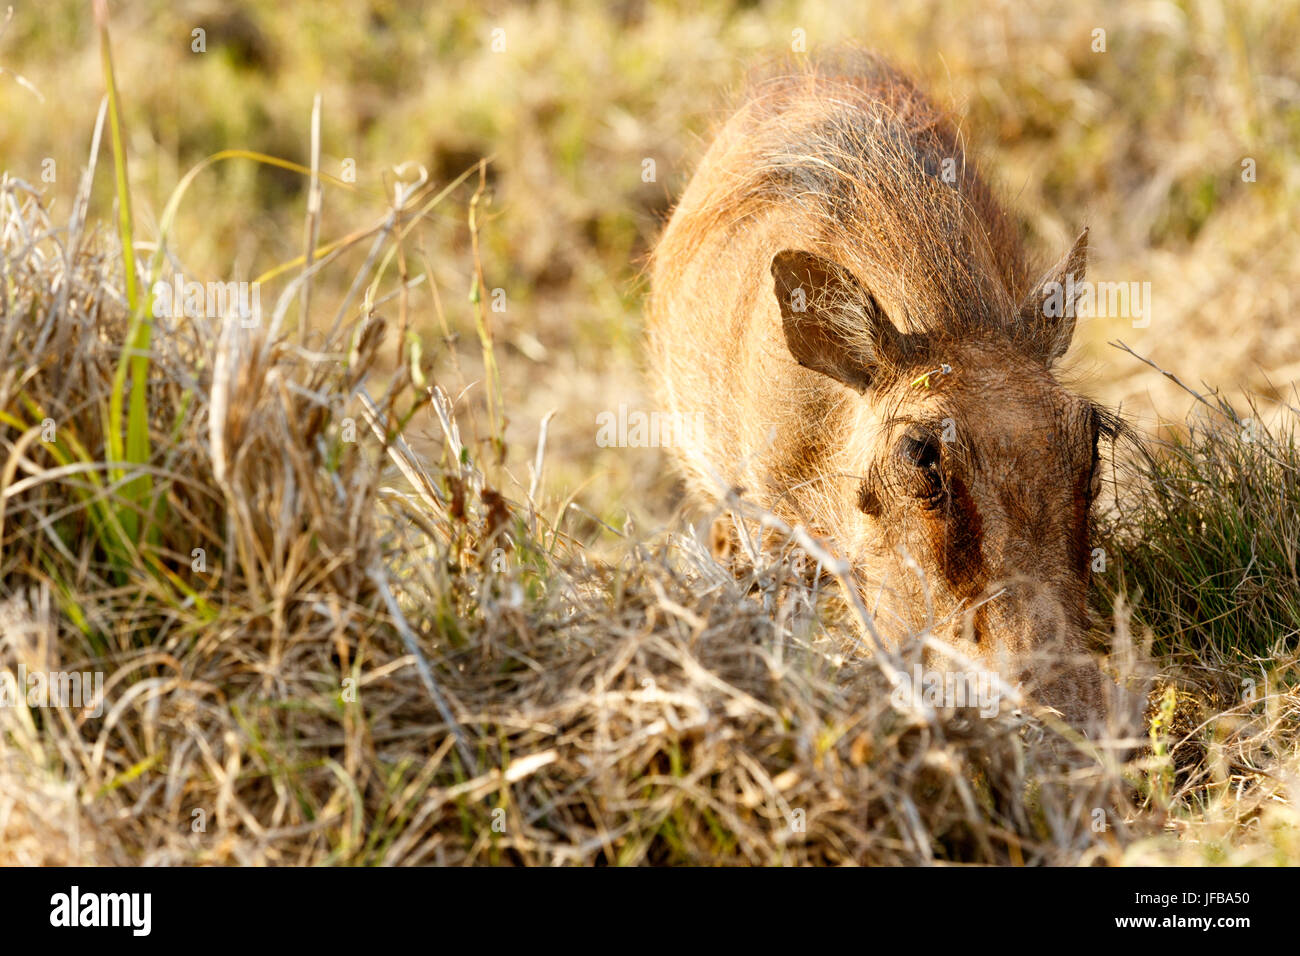 Common warthog so into his grass Stock Photo